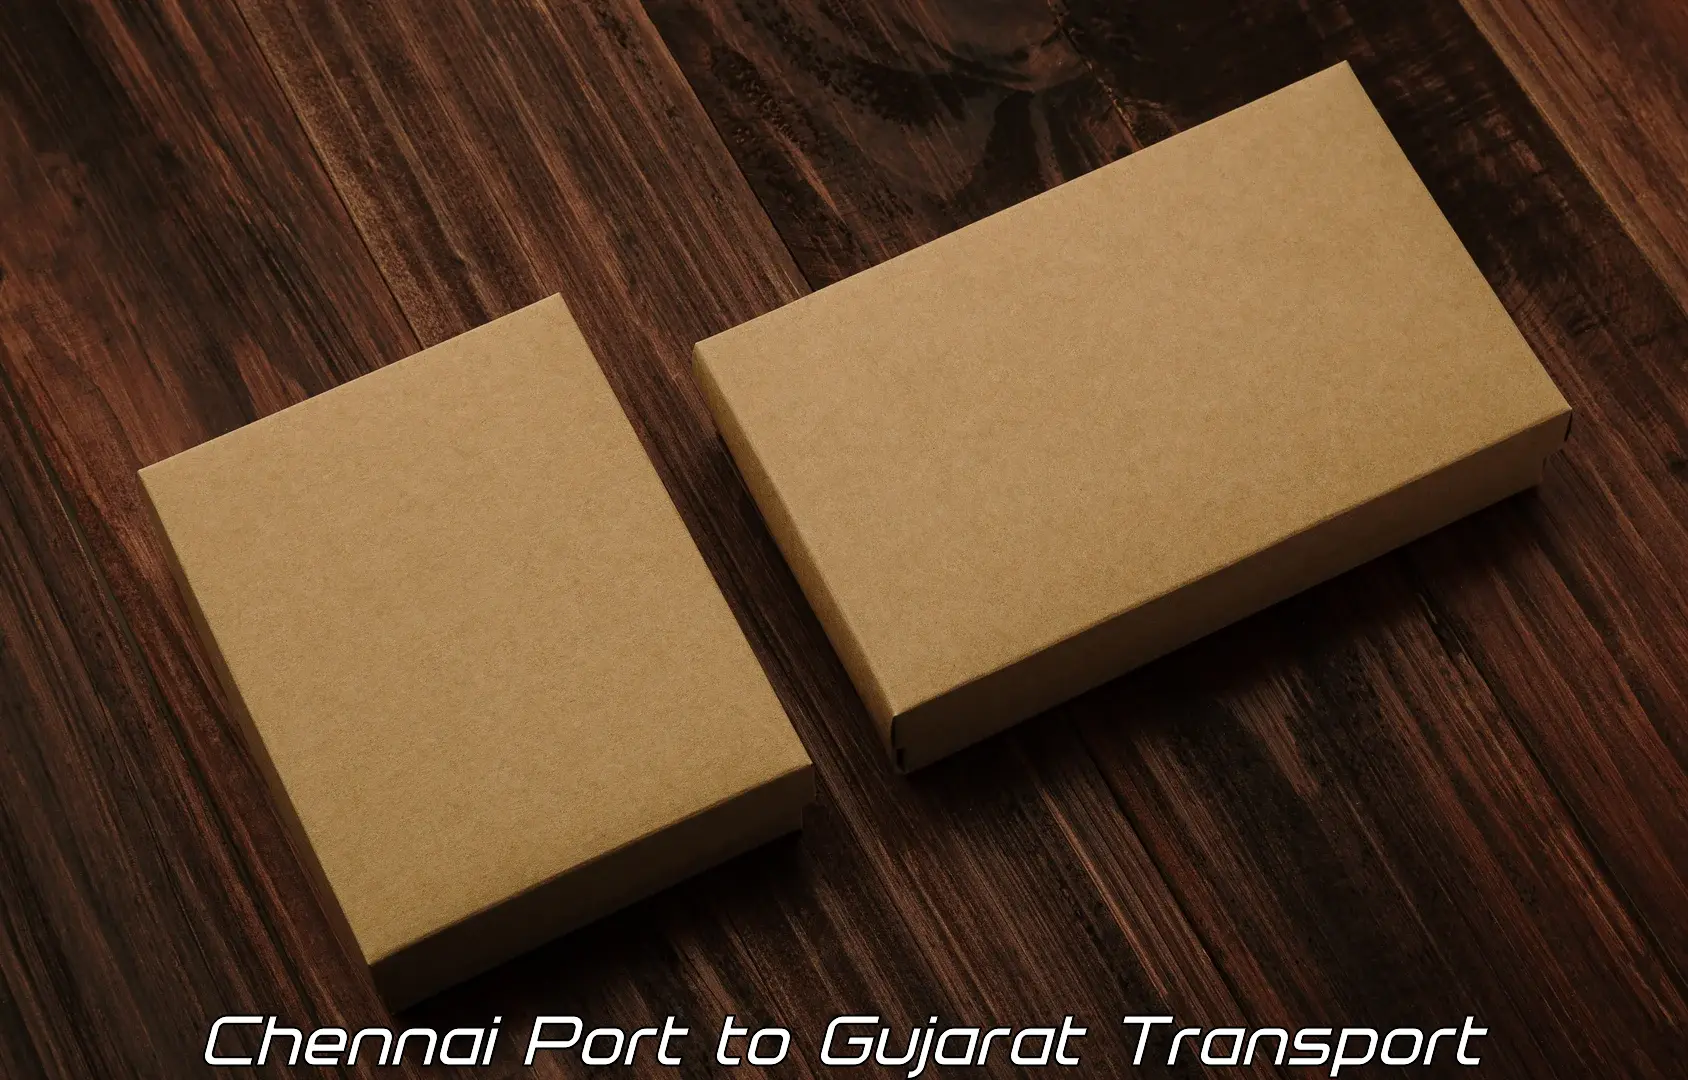 Bike shipping service in Chennai Port to Ahmedabad